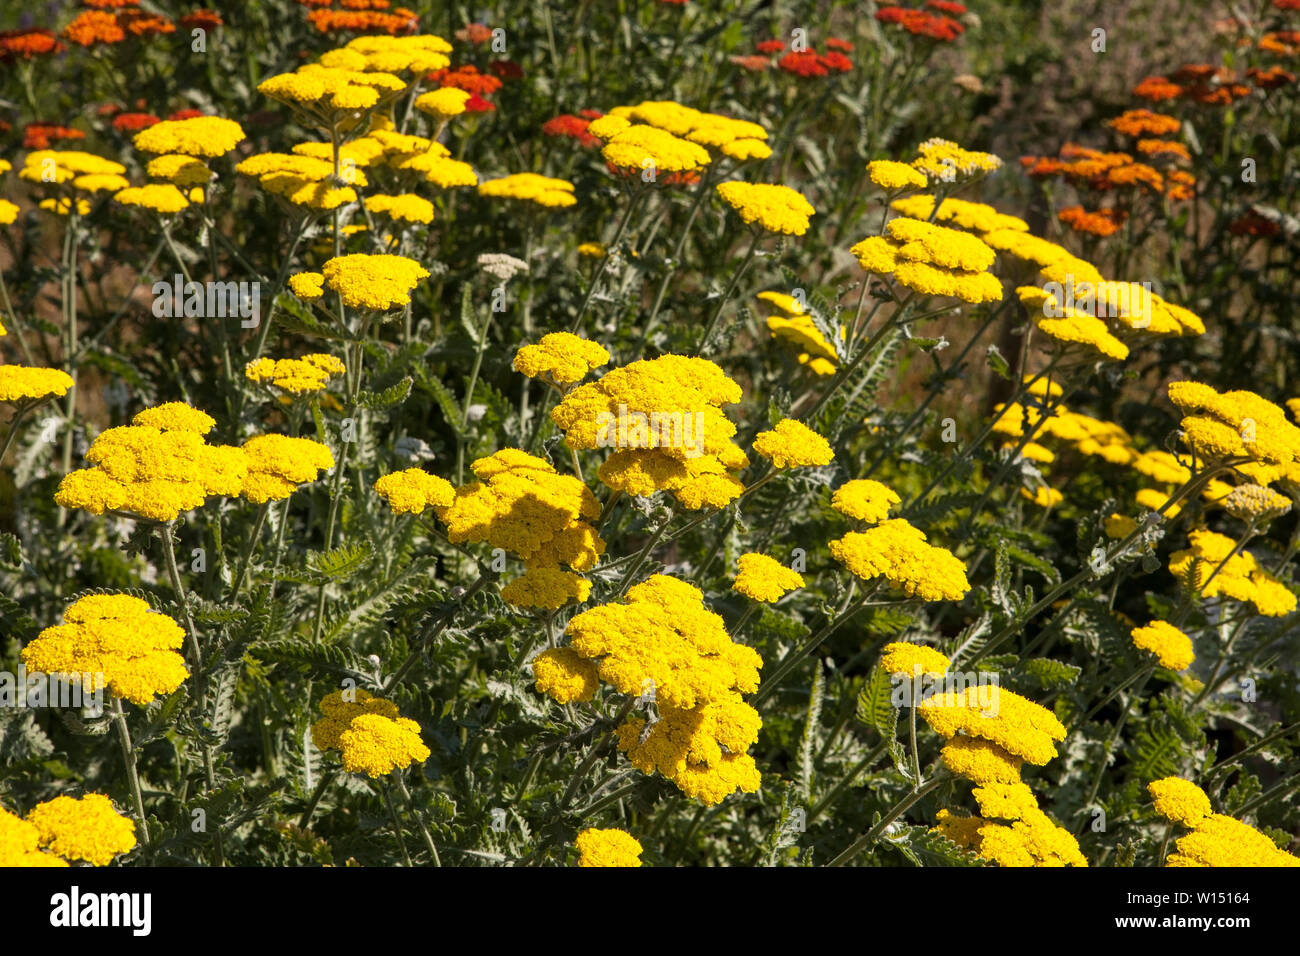 Achillea millefolium, commonly known as yarrow is a flowering plant in the family Asteraceae. Stock Photo